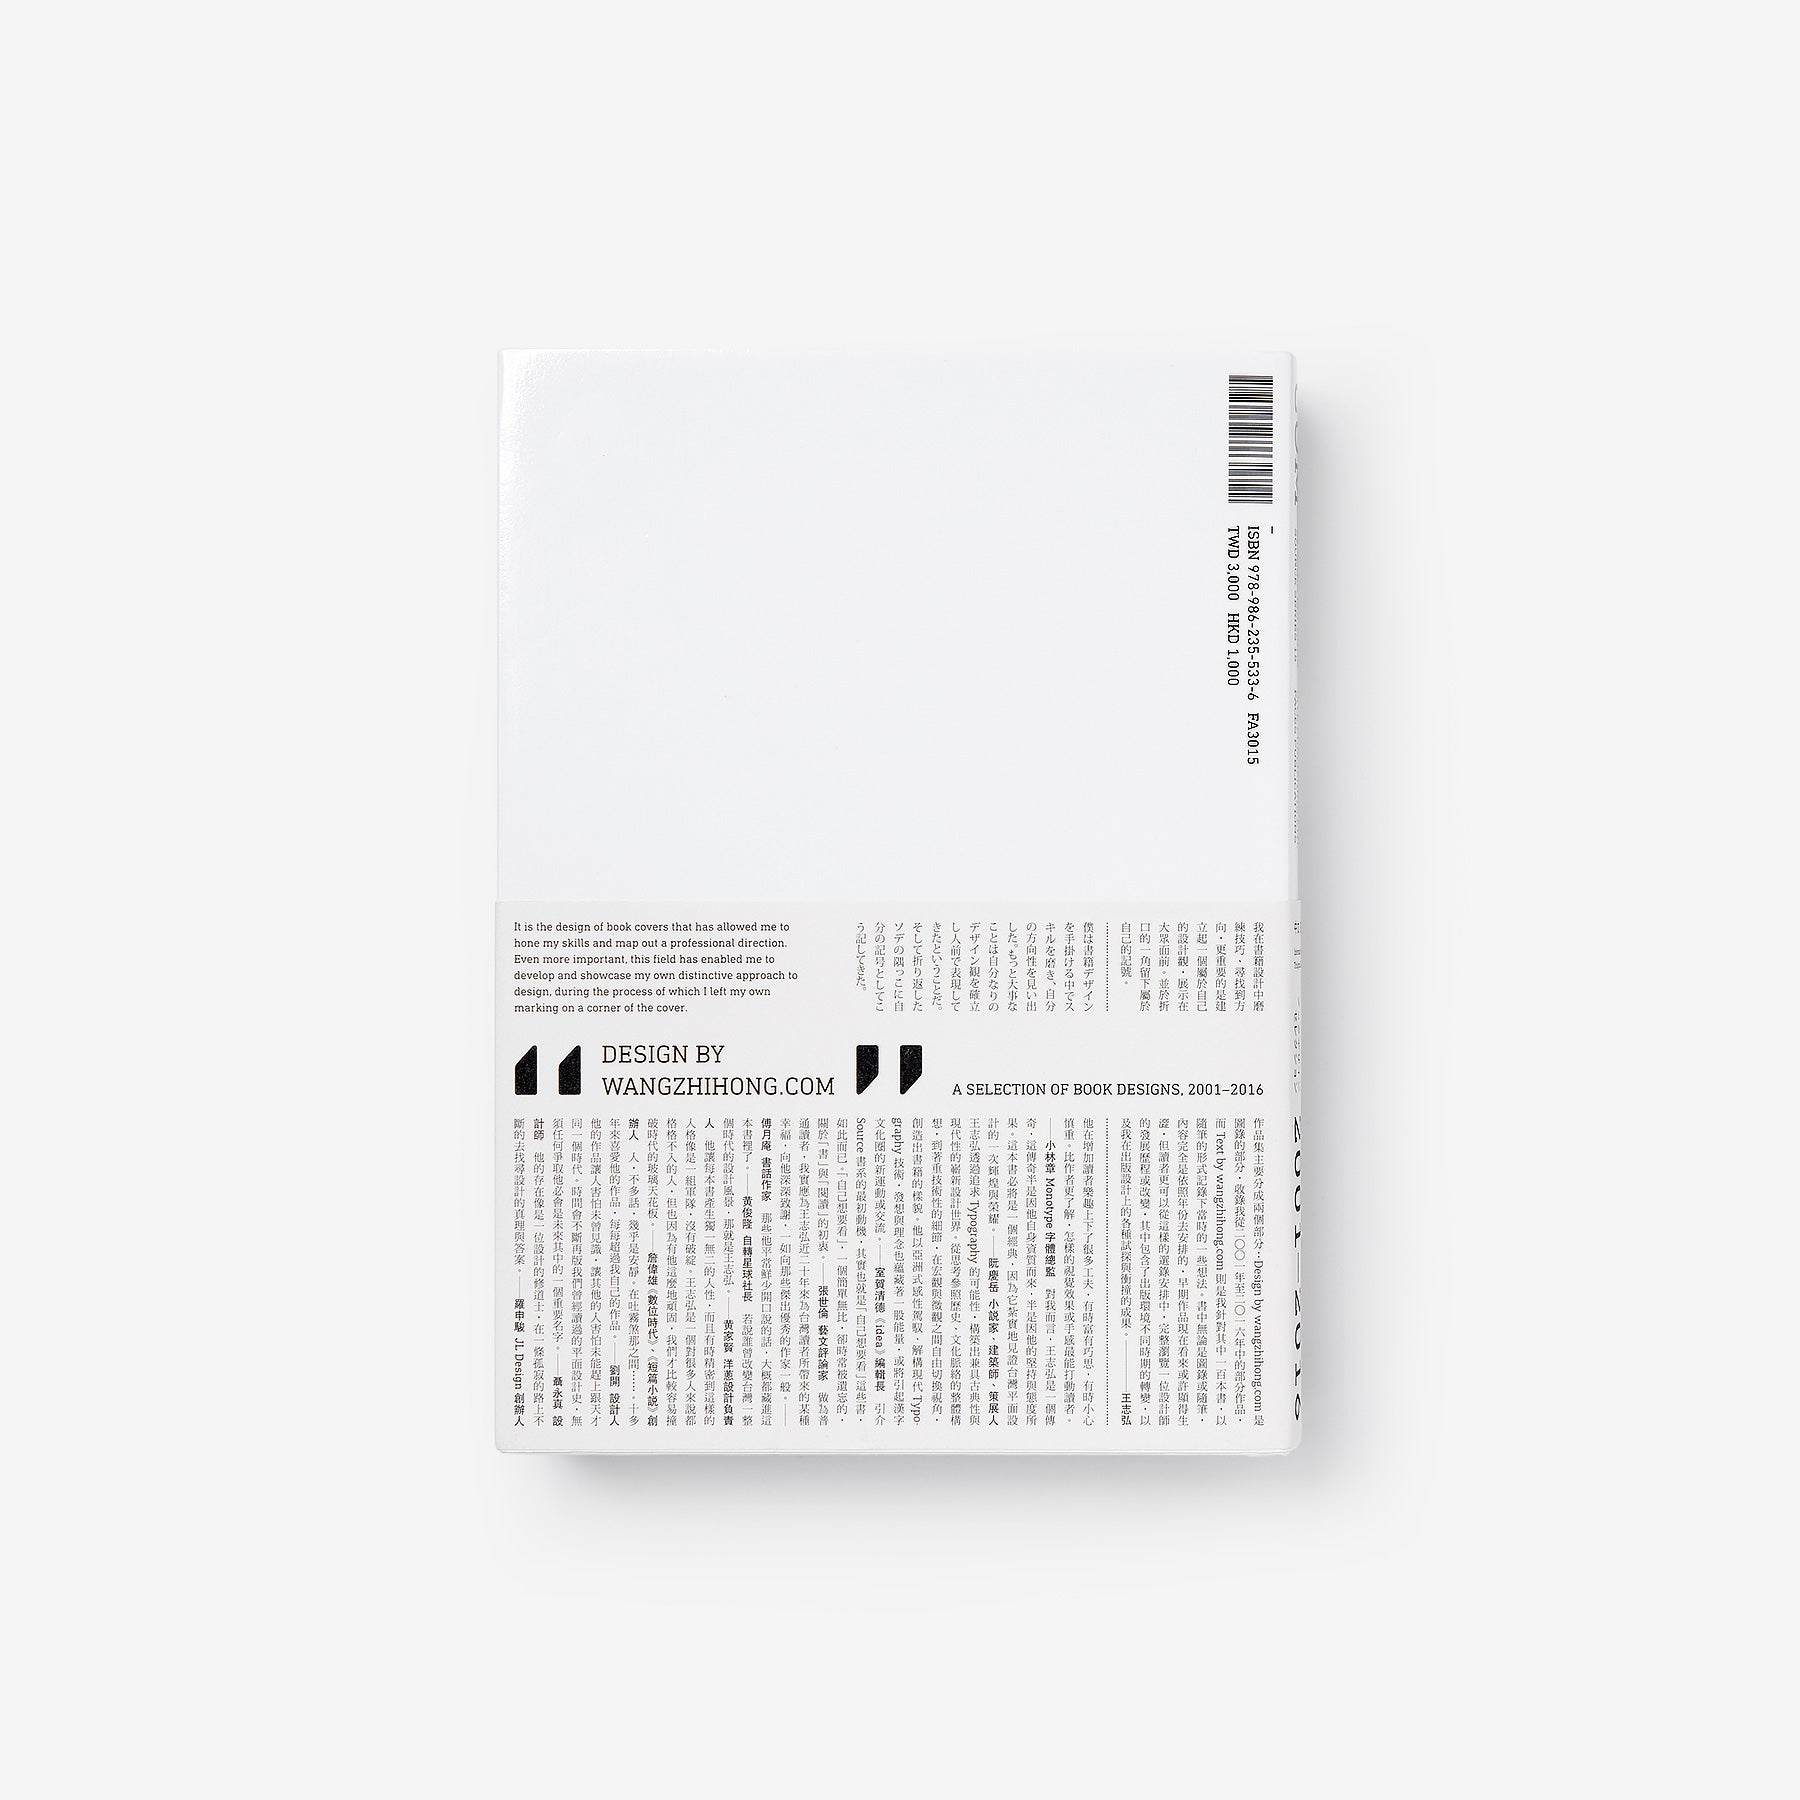 Design by wangzhihong.com: A Selection of Book Designs 2001-2016